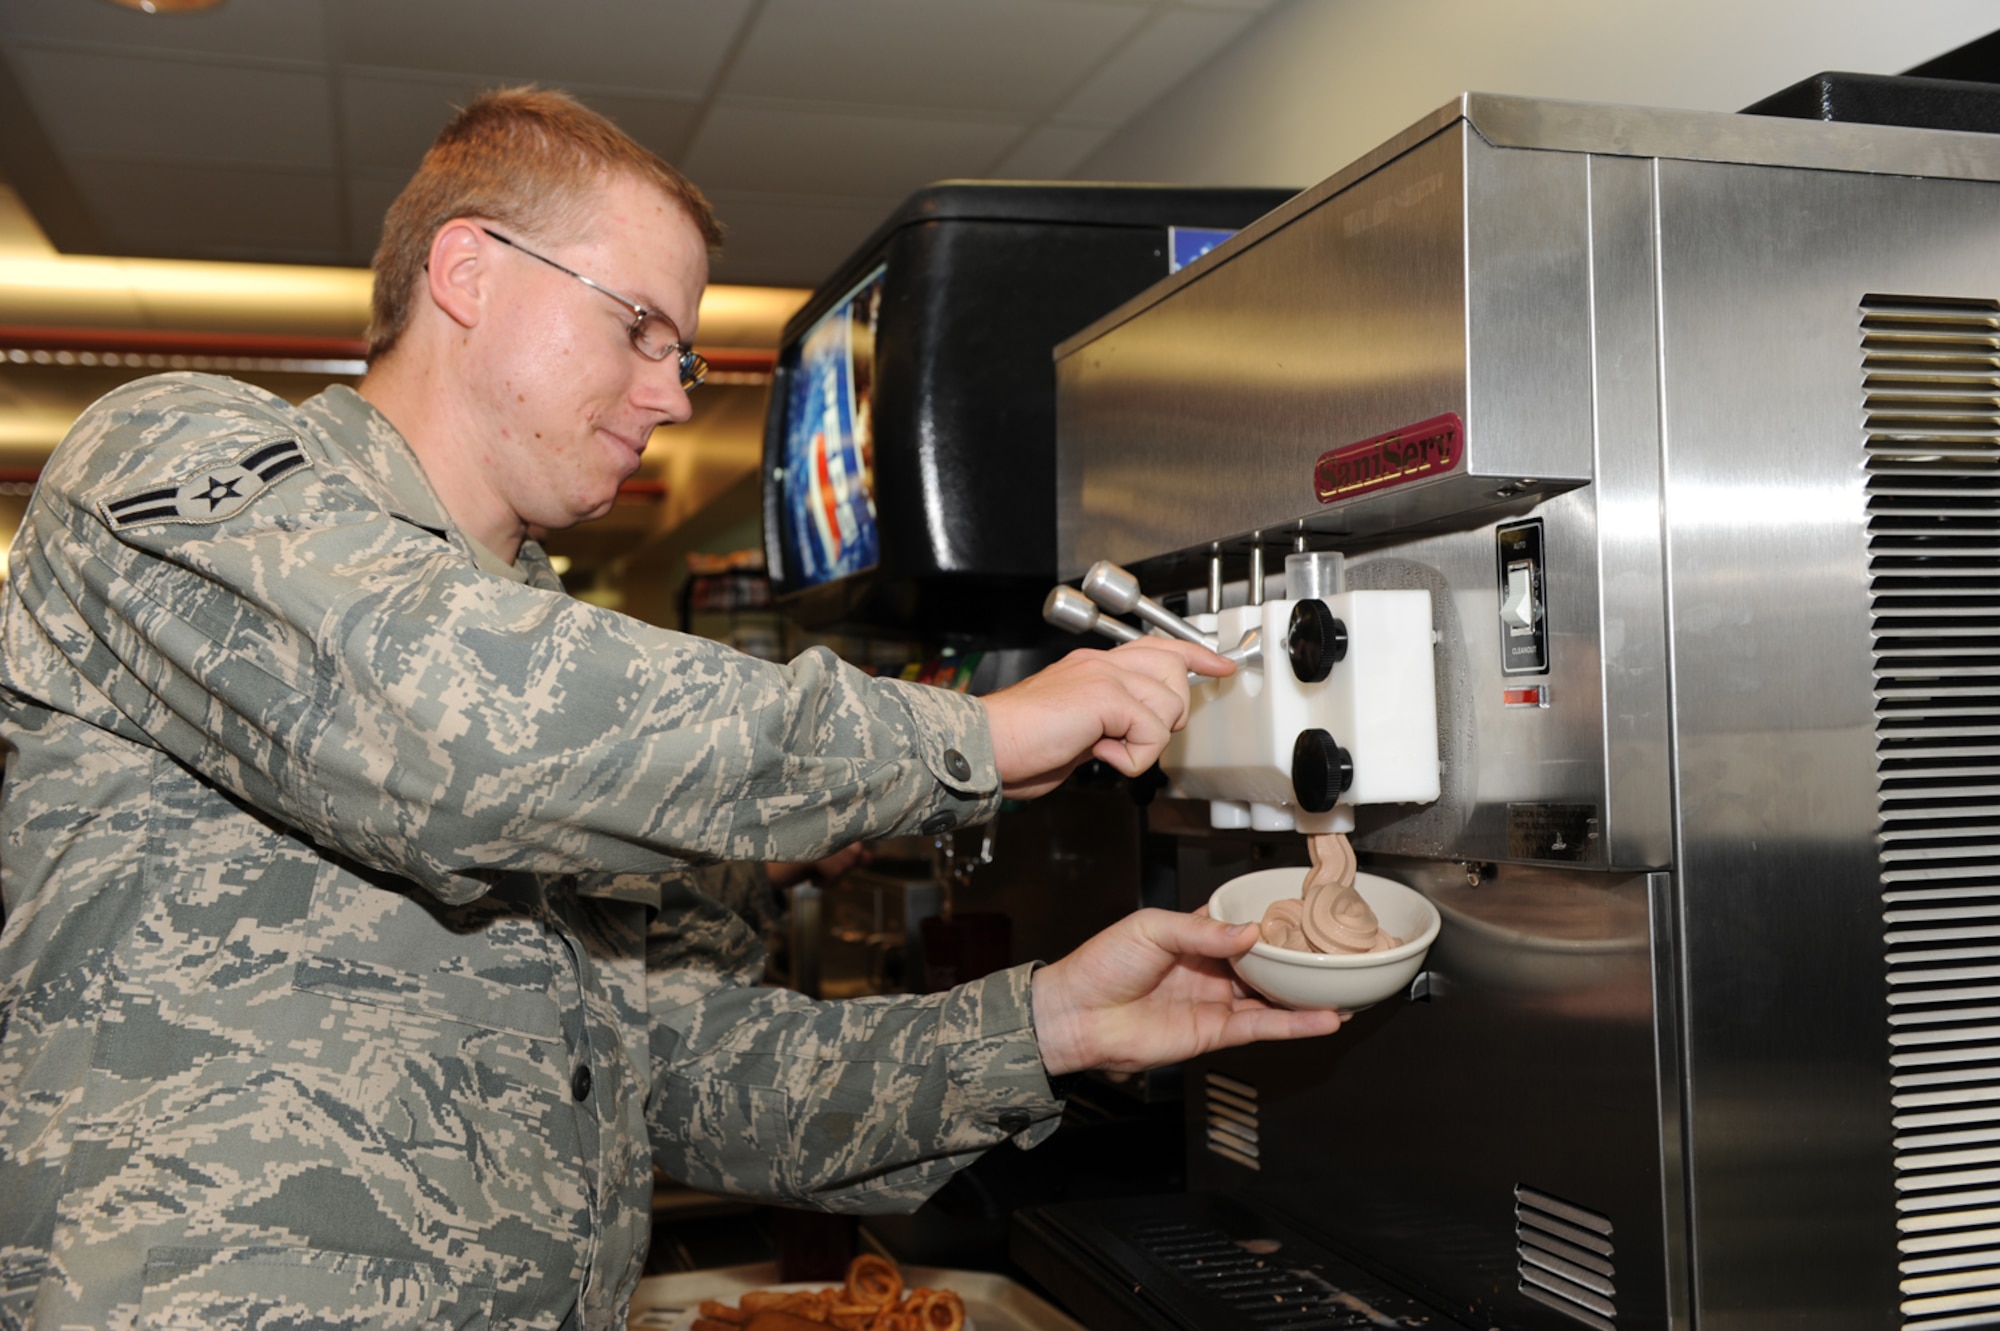 WHITEMAN AIR FORCE BASE, Mo. - Airman 1st Class Steven Carpenter, 509th Mission Support Group, knowledge operations management, enjoys the Ozark Inn’s new soft serve ice cream machine, June 19. Along with the chocolate soft serve, Ozark Inn serves Nestle ice cream bars and cakes and pies for dessert. (U.S. Air Force Photo/ Airman 1st Class Carlin Leslie)